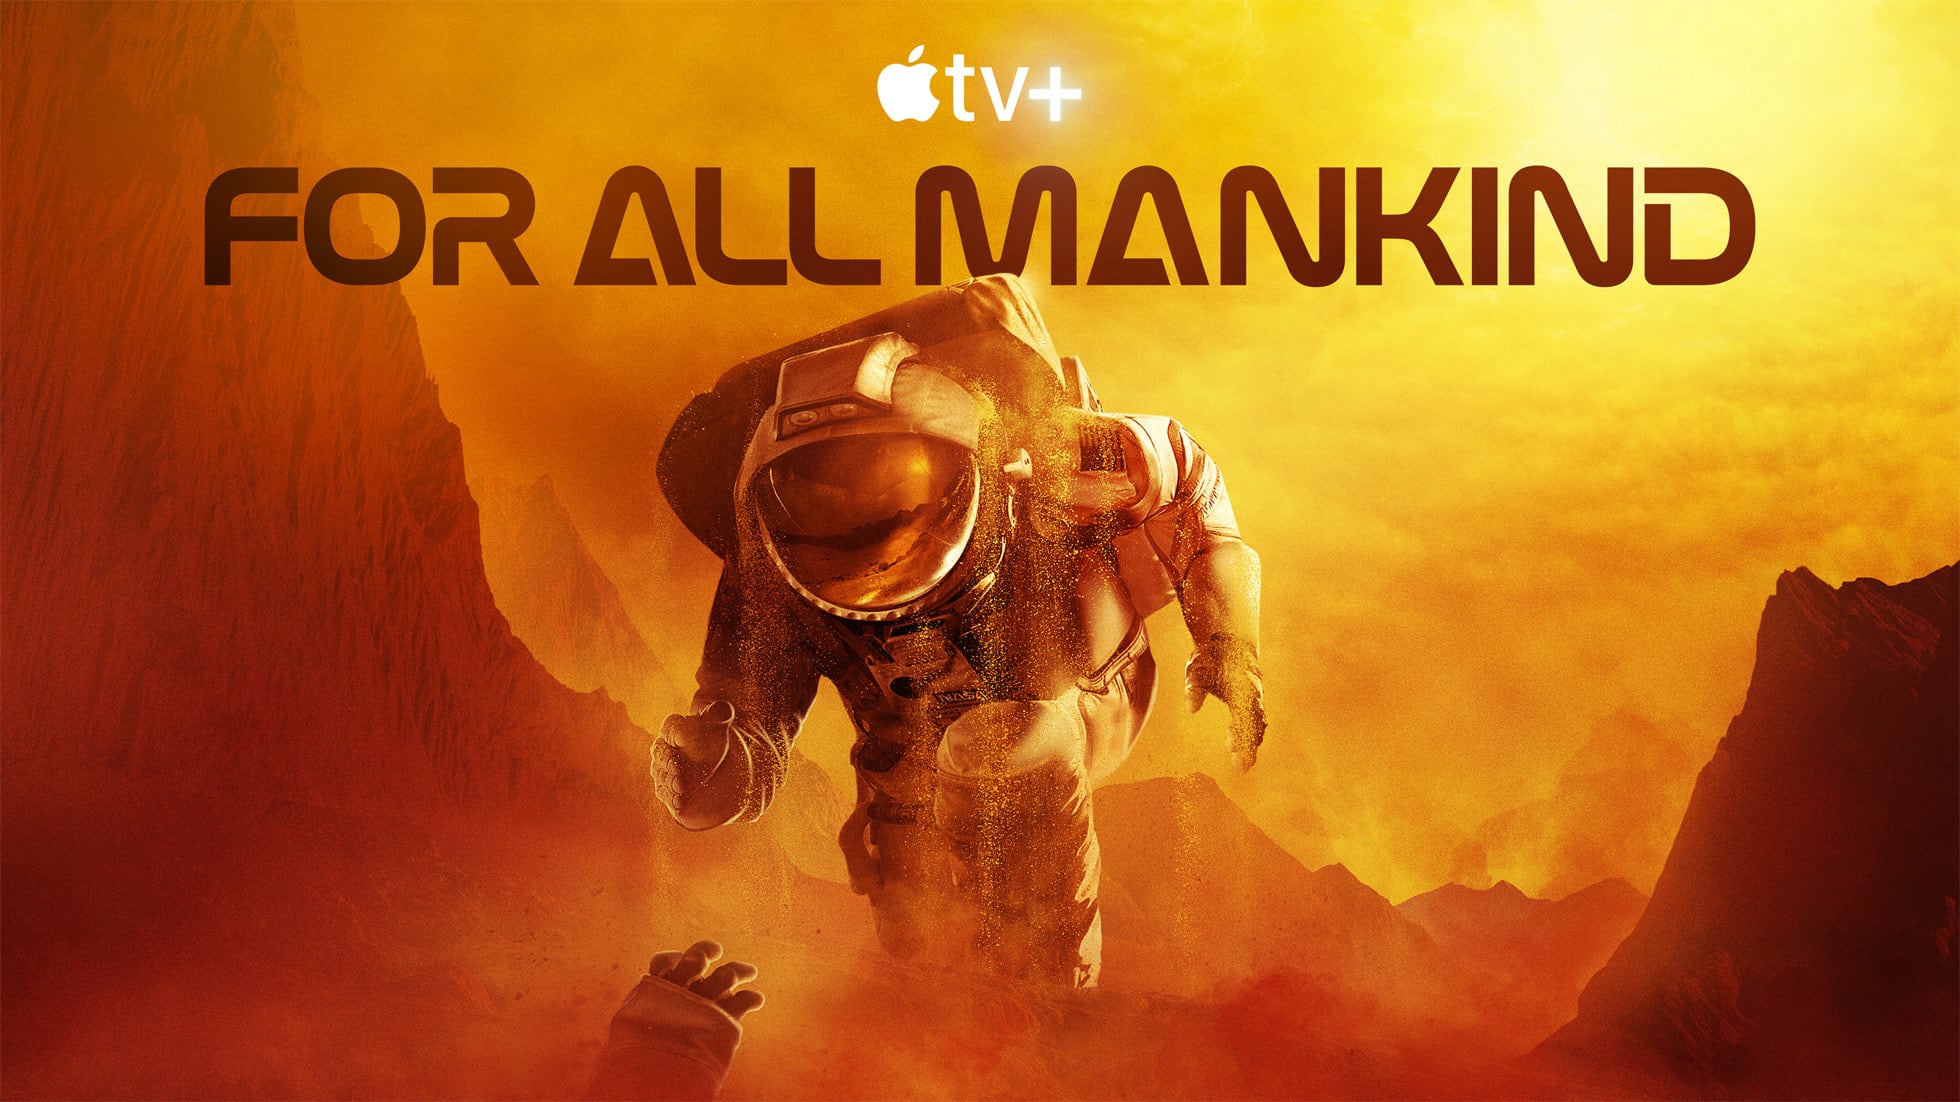 Apple TV+ Show 'For All Mankind' Renewed for Fourth Season